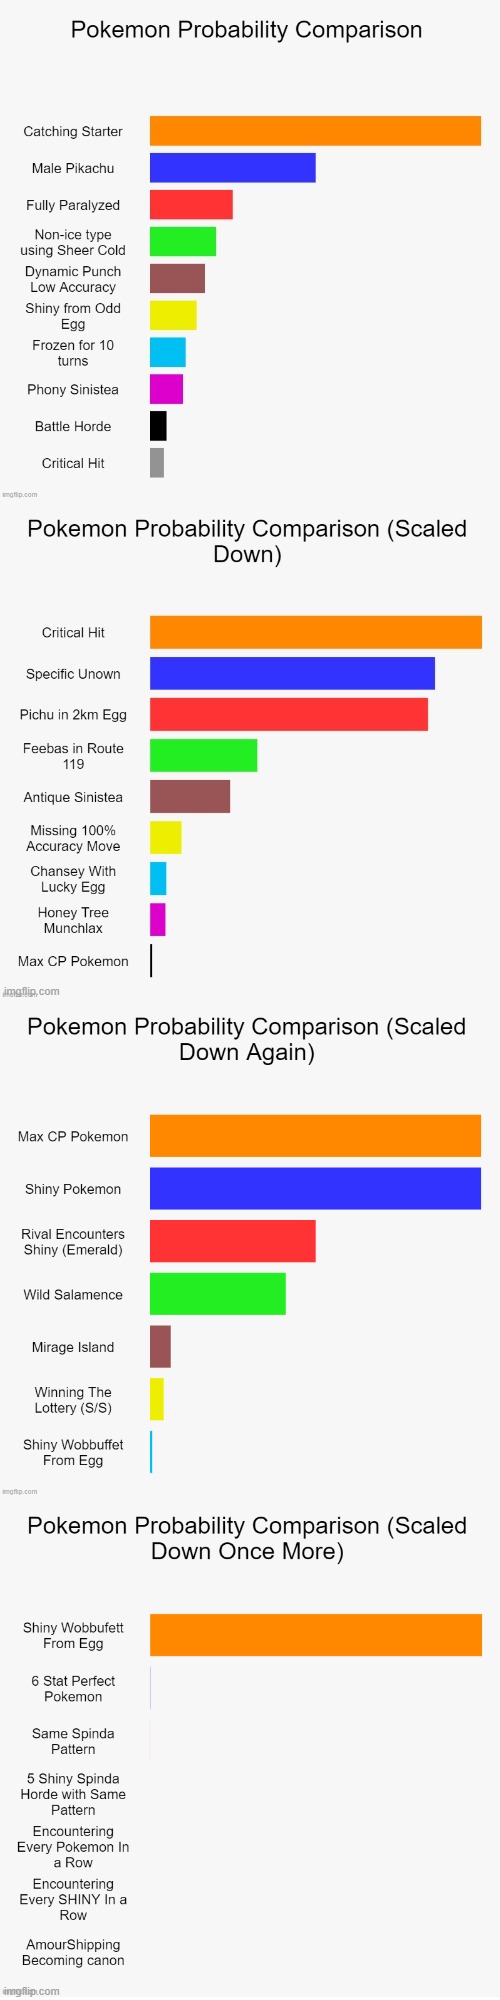 The Last One Is Sadly True | image tagged in memes,charts,bar charts,pokemon,probability,why are you reading this | made w/ Imgflip meme maker